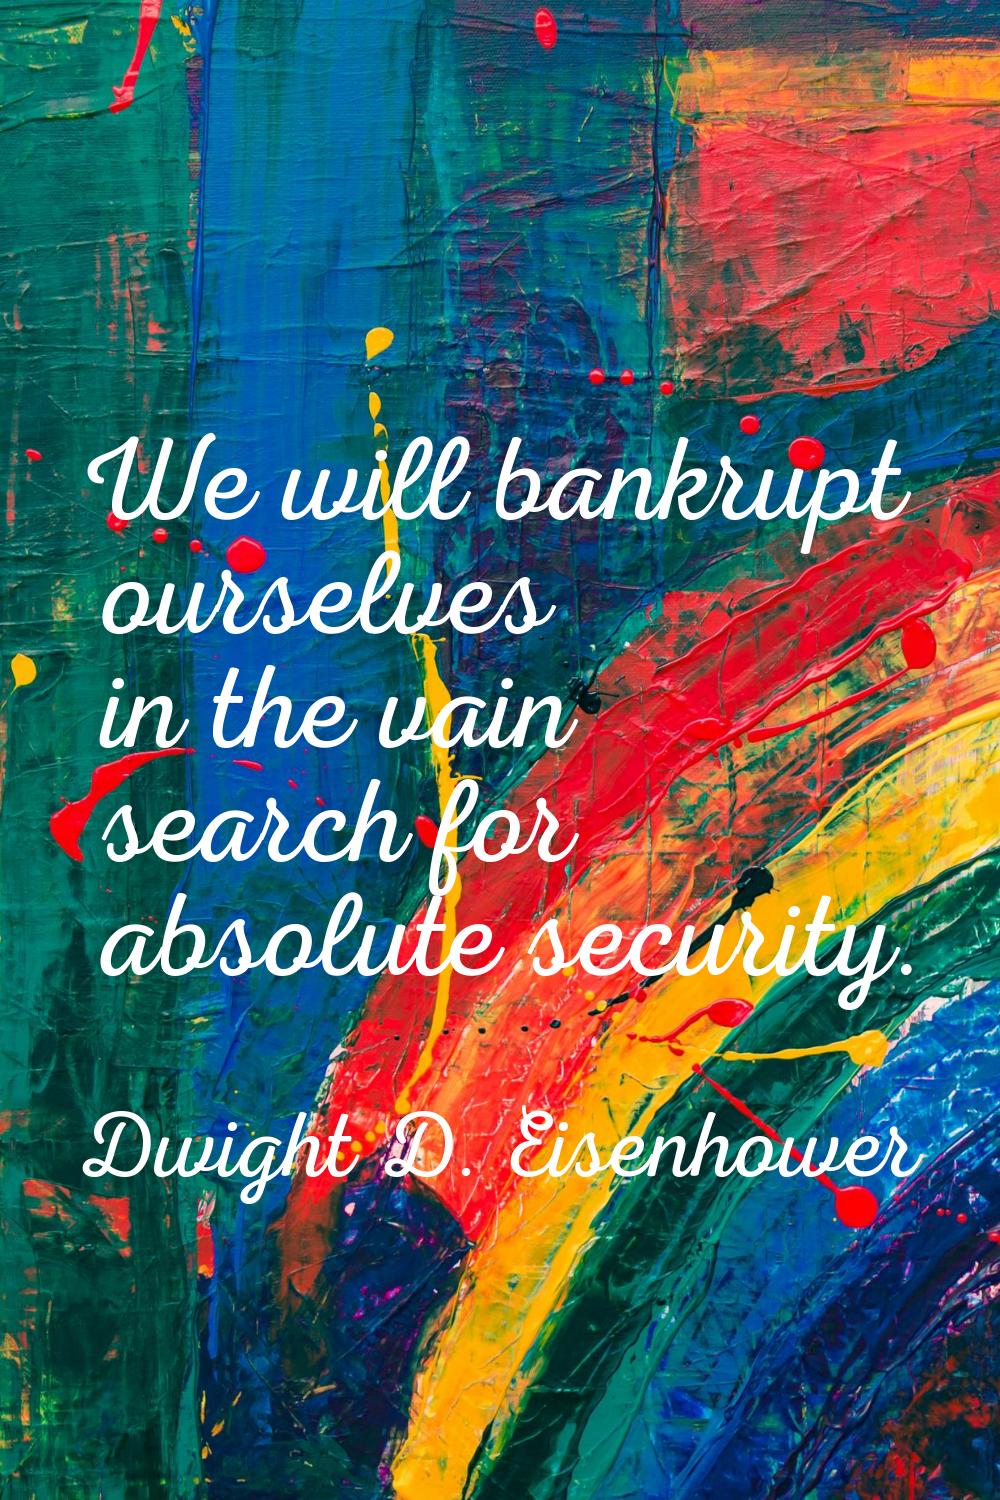 We will bankrupt ourselves in the vain search for absolute security.